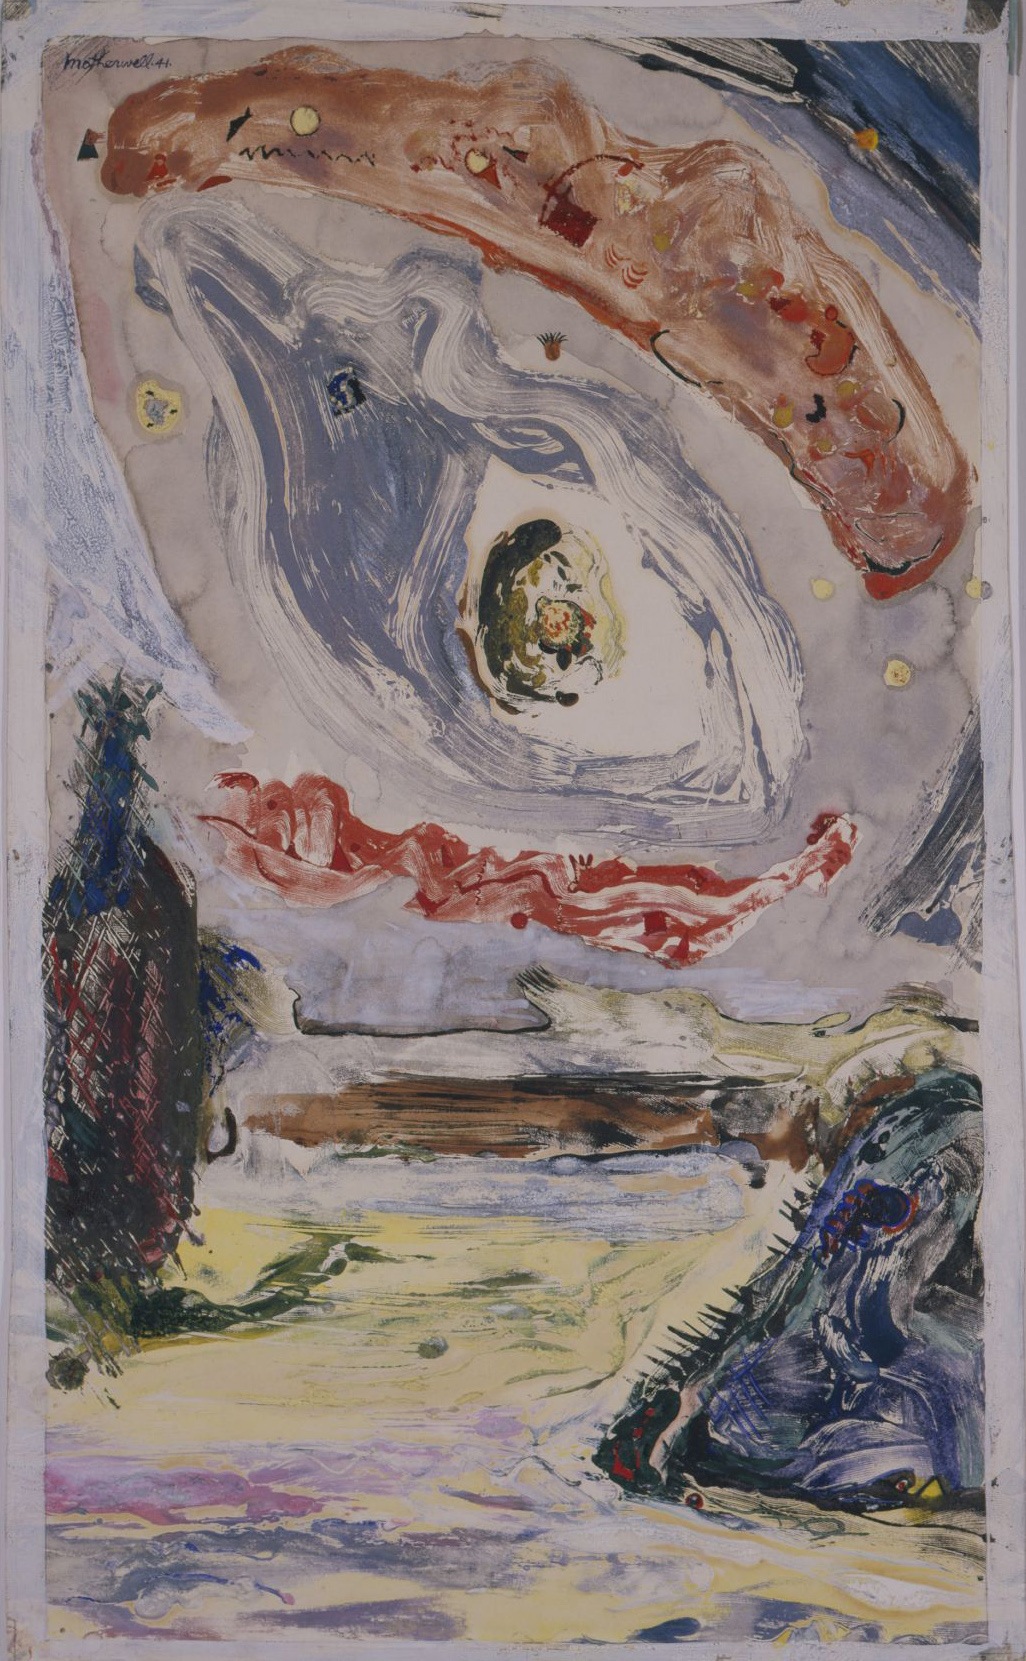 Untitled, 1941. Monoprint and paint on paper, 20 x 12 1/8 inches (50.8 x 30.8 cm)